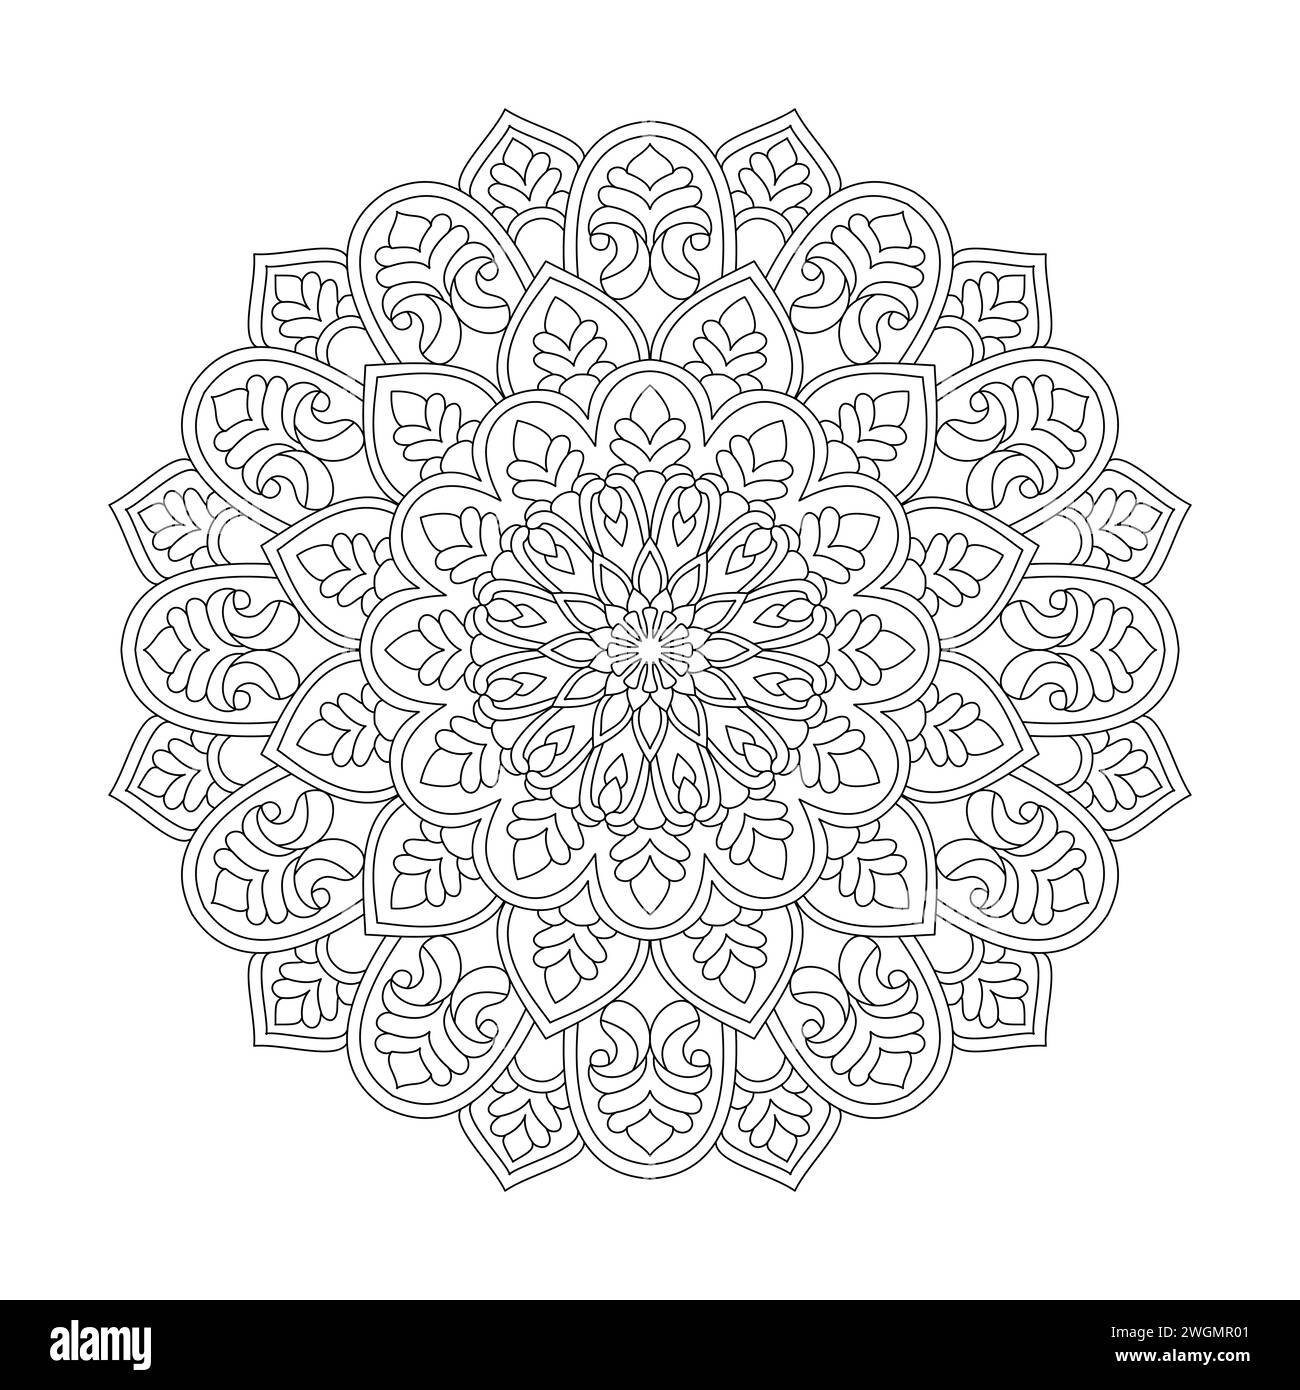 Peaceful Zen Blossoms Mandala Colouring Book Page for KDP Book Interior. Peaceful Petals, Ability to Relax, Brain Experiences, Harmonious Haven, Stock Vector